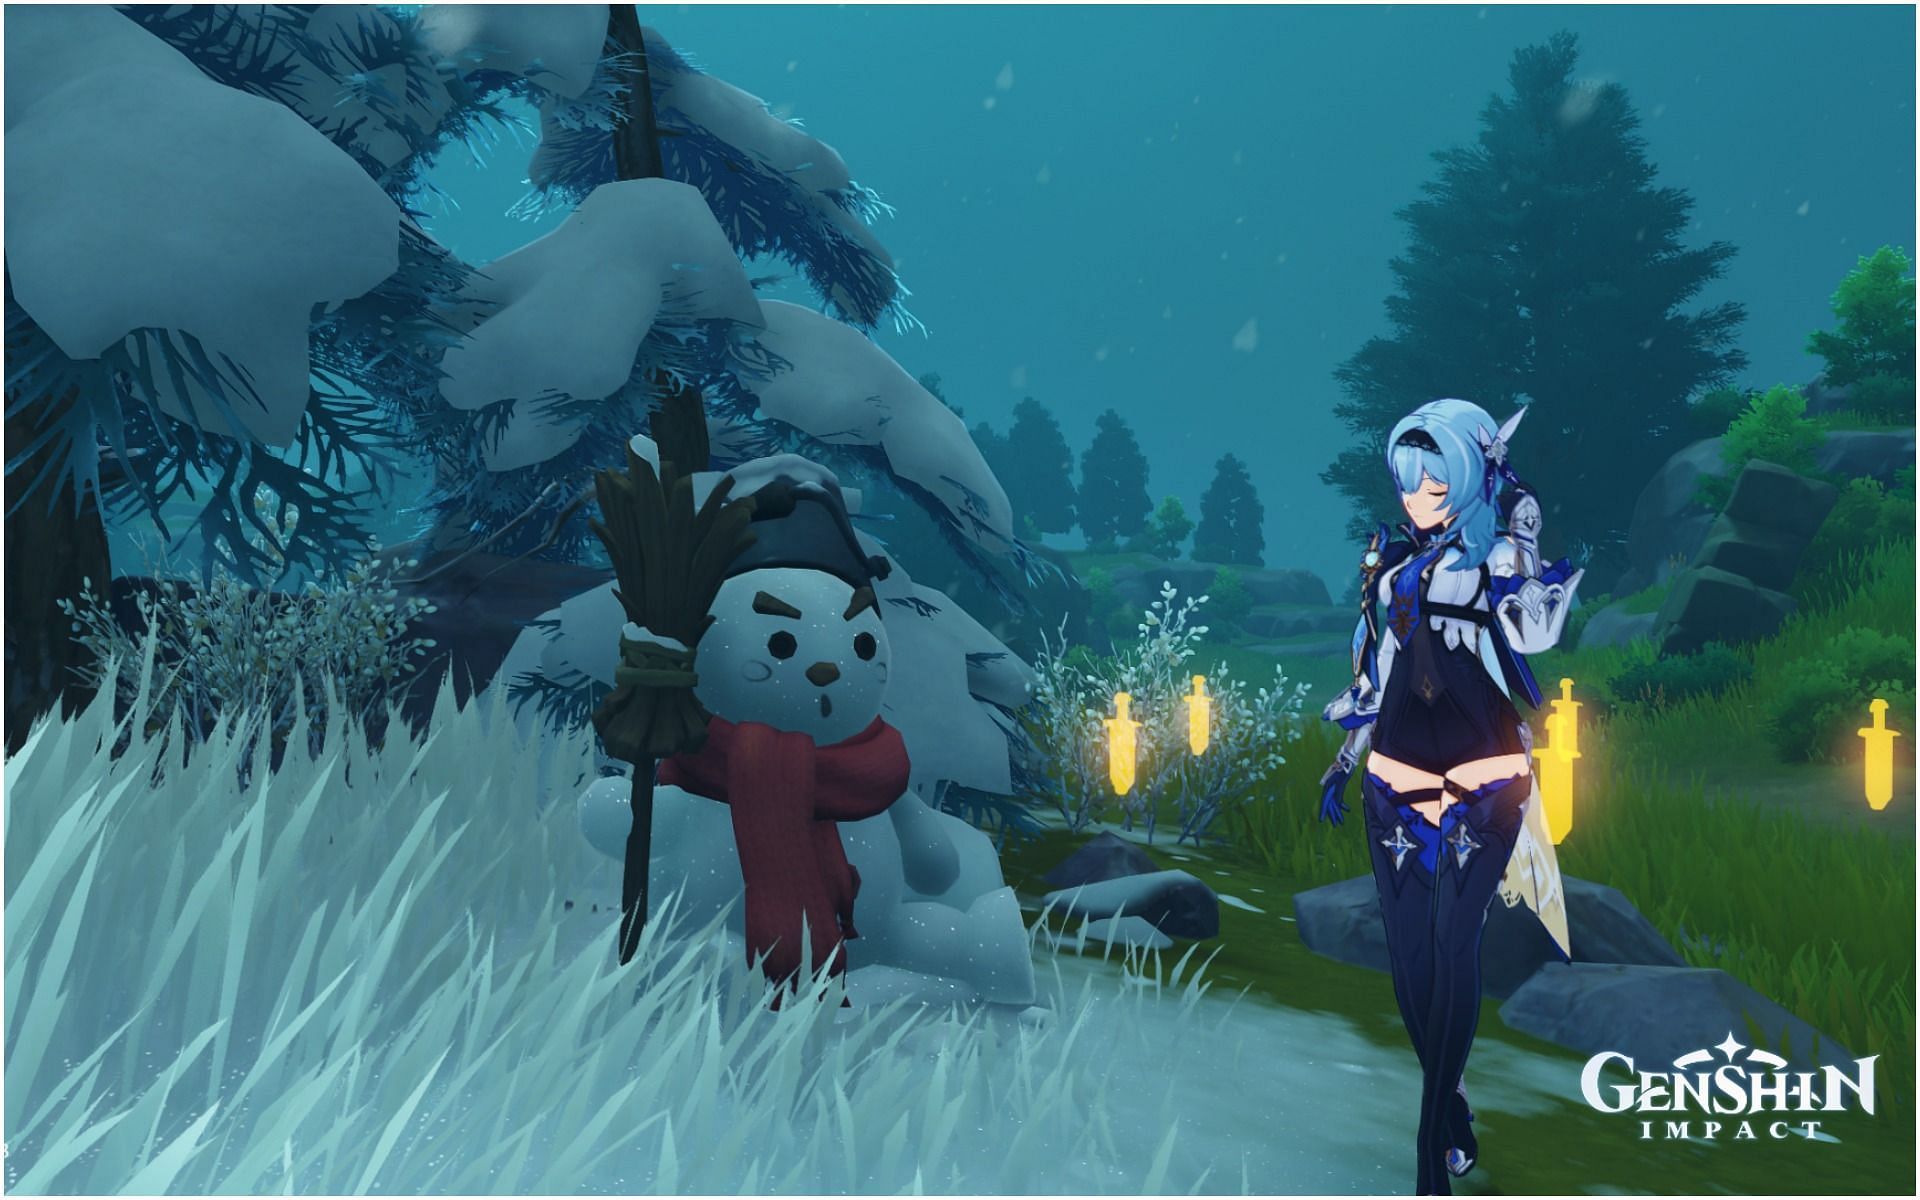 Players can now build their very own Snowman in the latest event (Image via Genshin Impact)